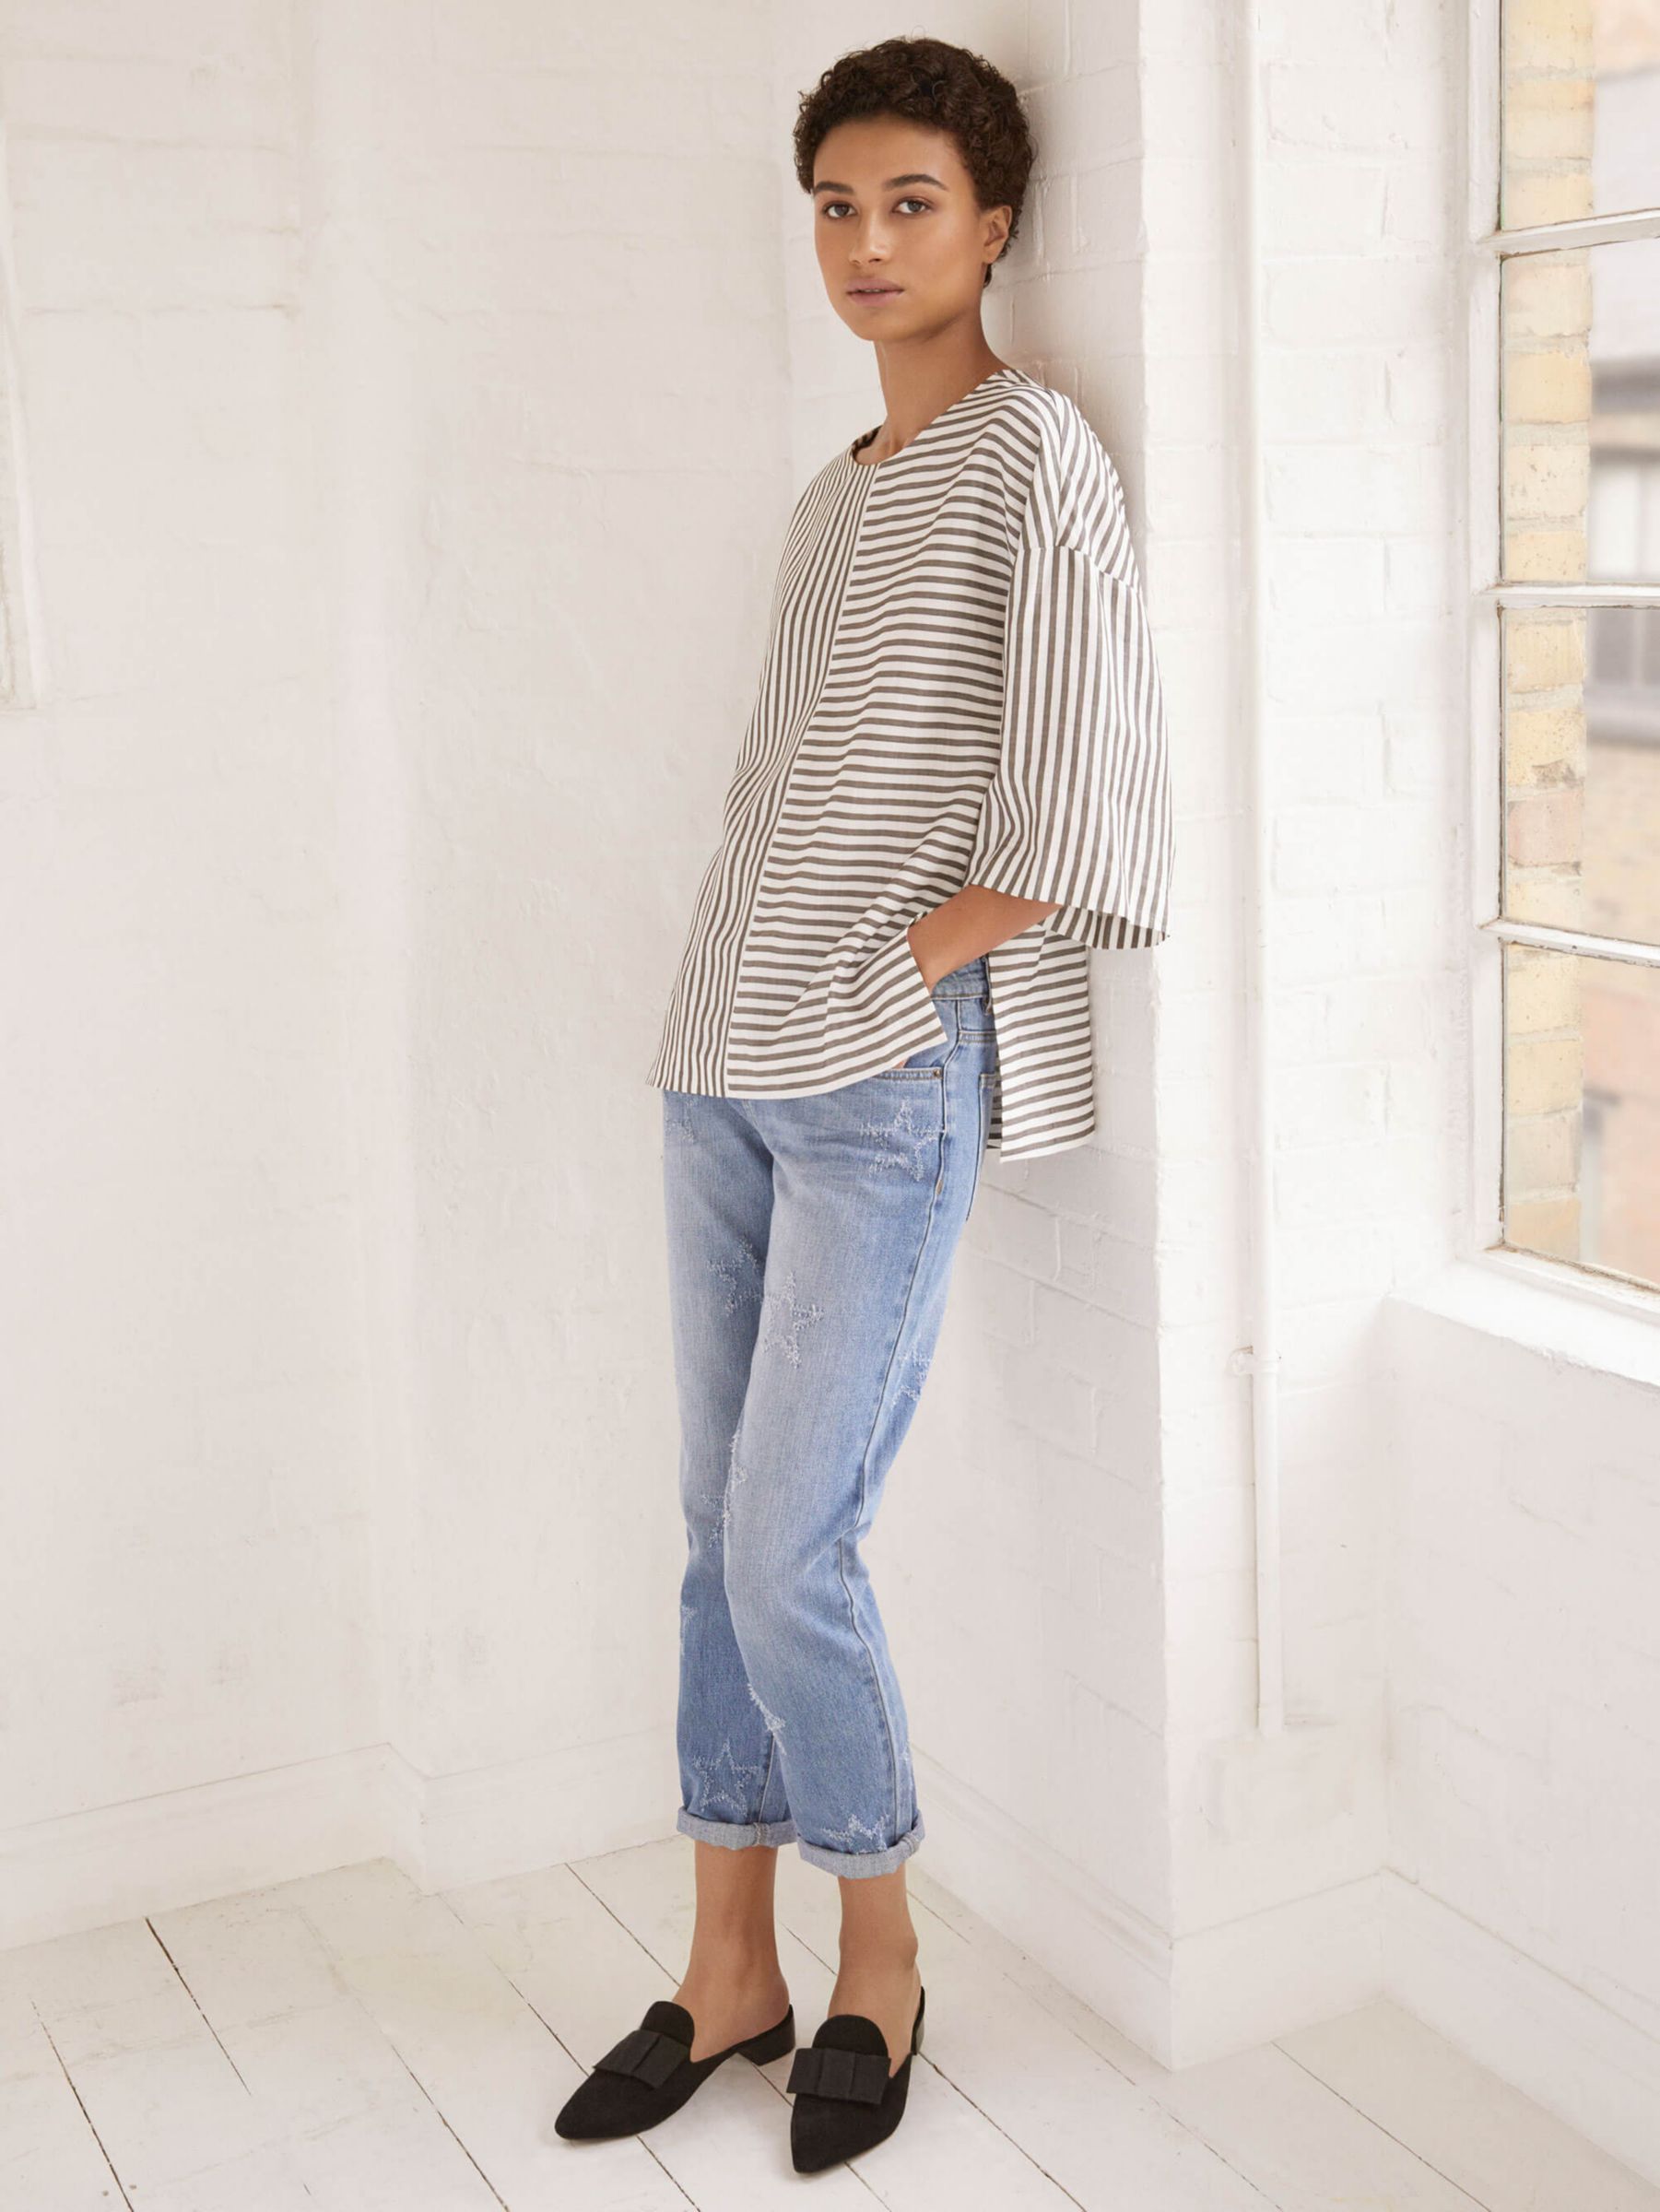 Woman leaning against a wall in blue jeans and a striped top